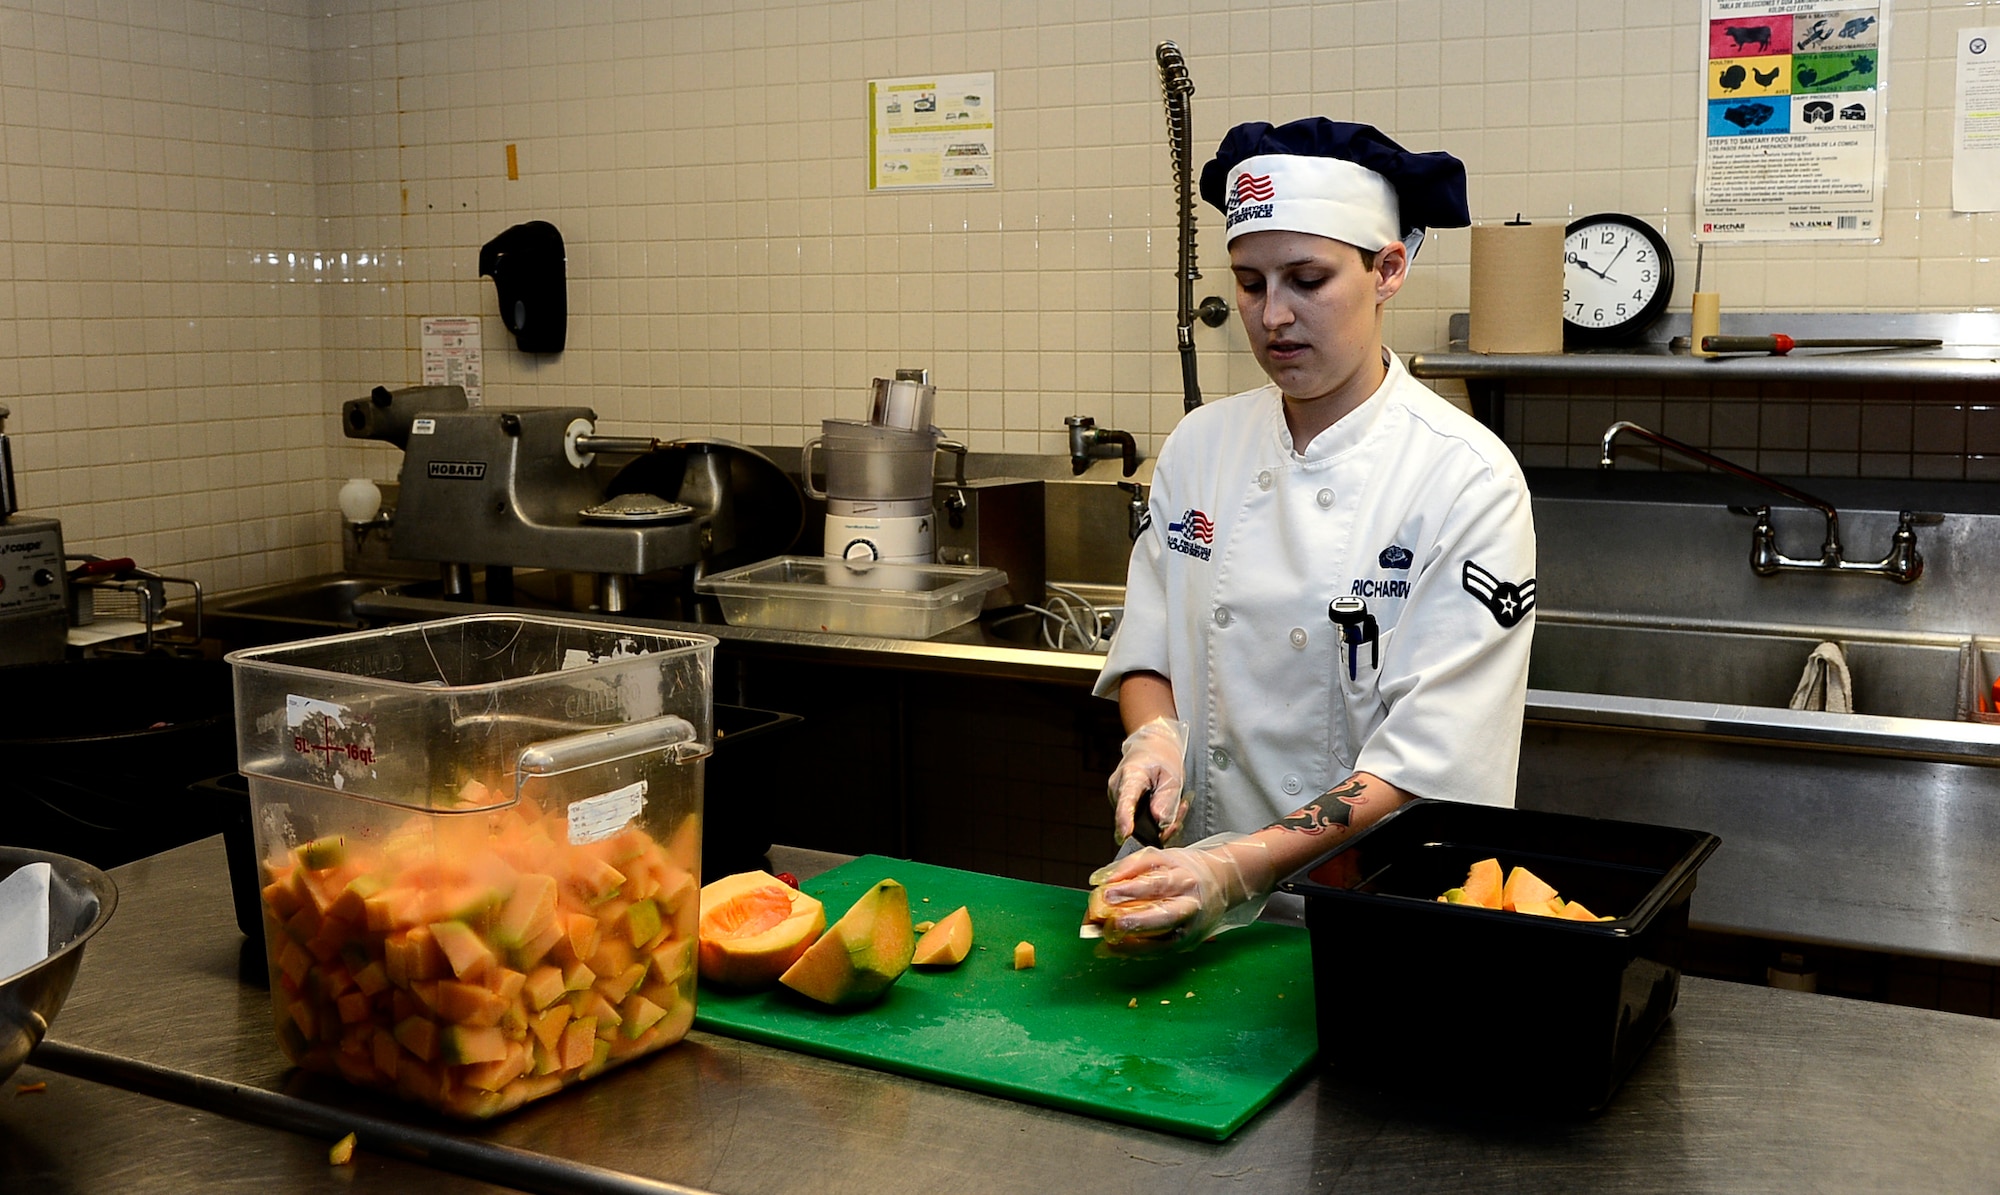 Airman 1st Class Lundia Richardson, a food specialist assigned to the 6th Force Support Squadron, cuts cantaloupe for fruit cups at MacDill Air Force Base, Fla., July 26, 2016. Richardson is in charge of keeping the fruit and salad bar stocked during meal times. (U.S. Air Force photo by Senior Airman Tori Schultz)